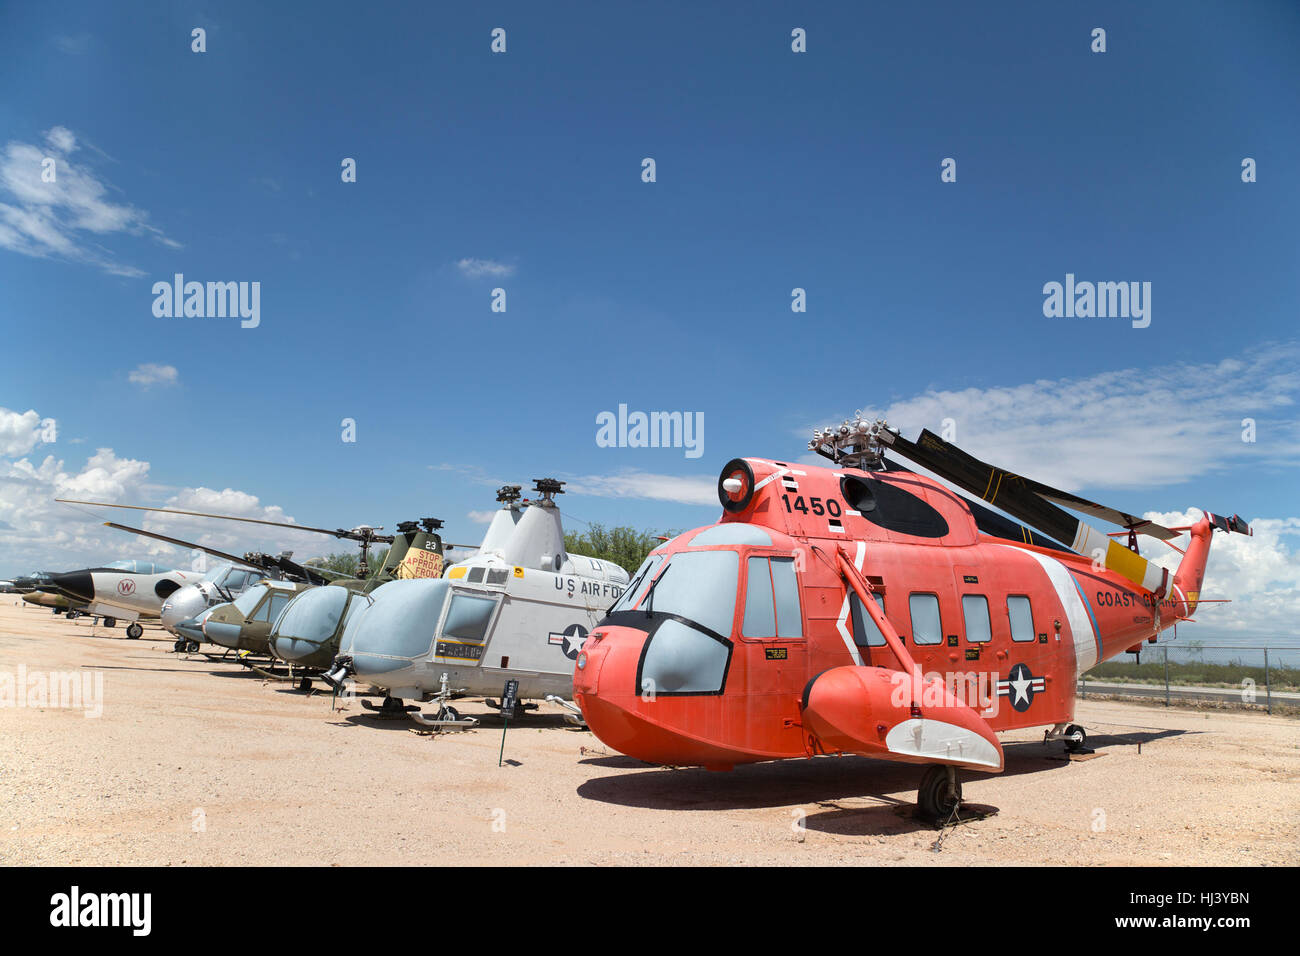 Row of helicopters on display at Pima Air & Space Museum Stock Photo